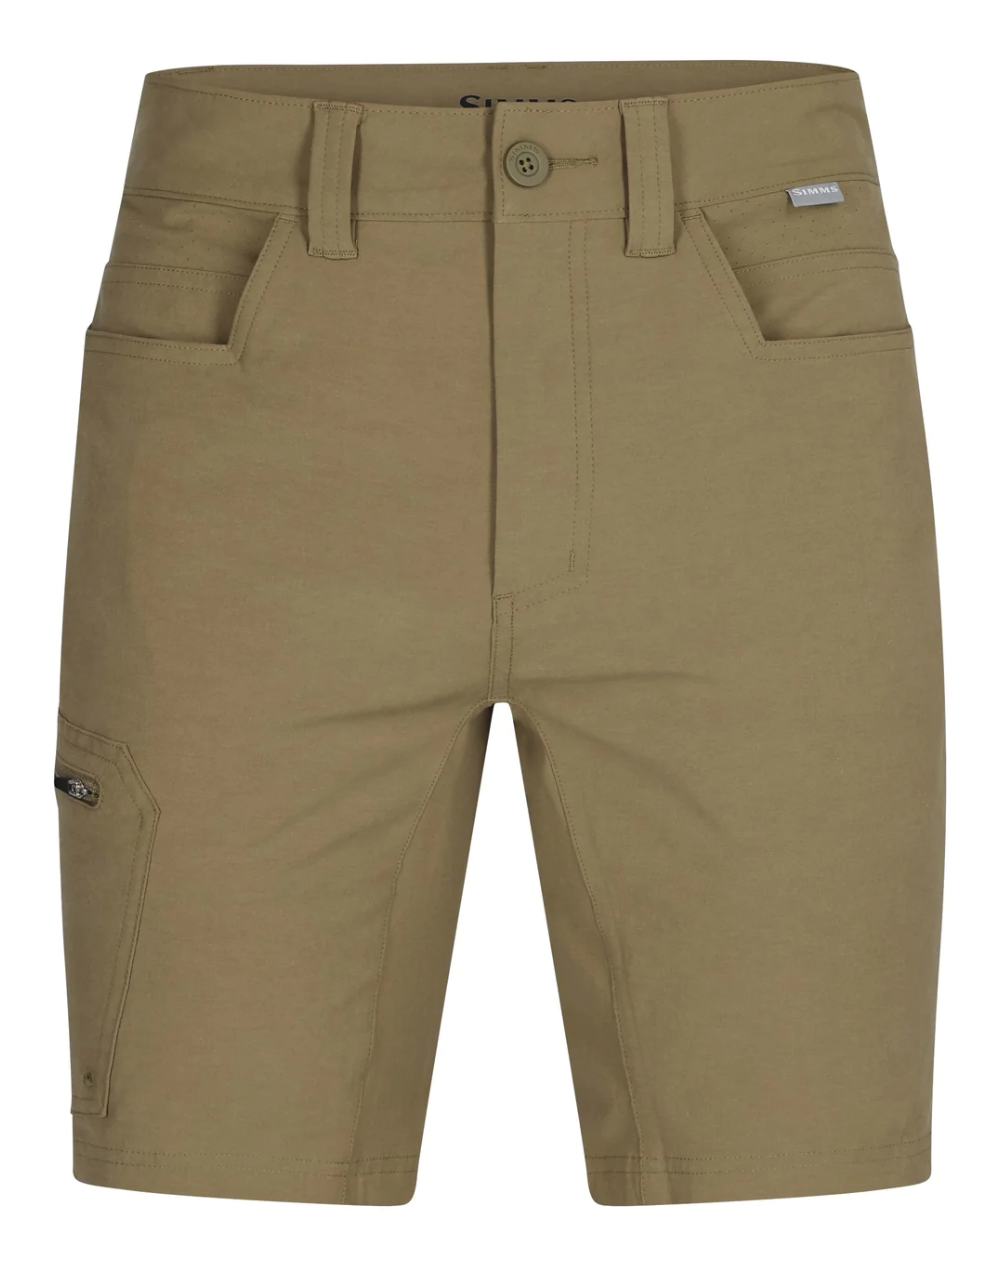 Fly Fishing Clothing and Footwear: Sale & Clearance Prices